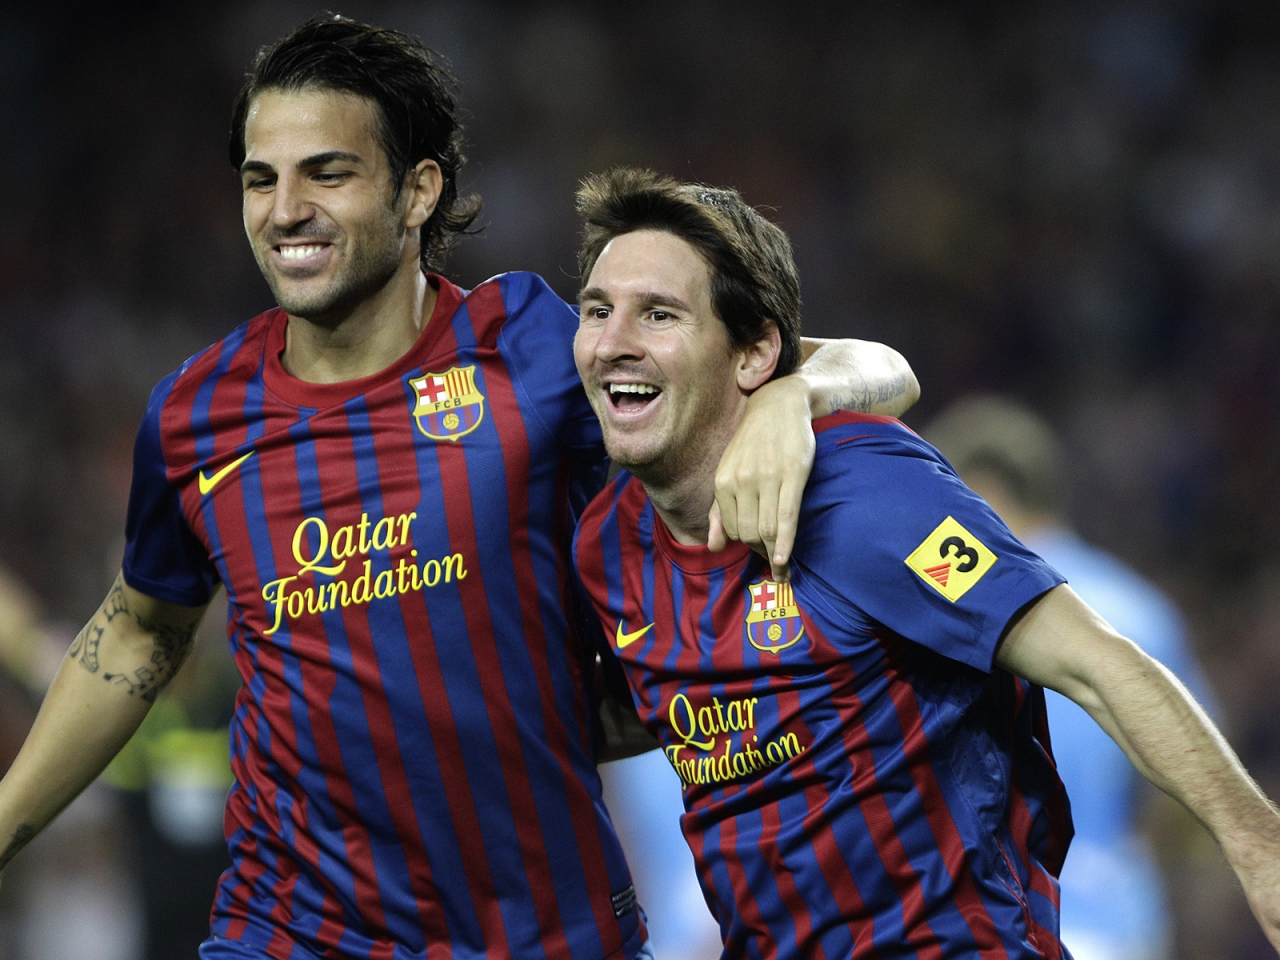 Cesc Fabregas and Lionel Messi for 1280 x 960 resolution